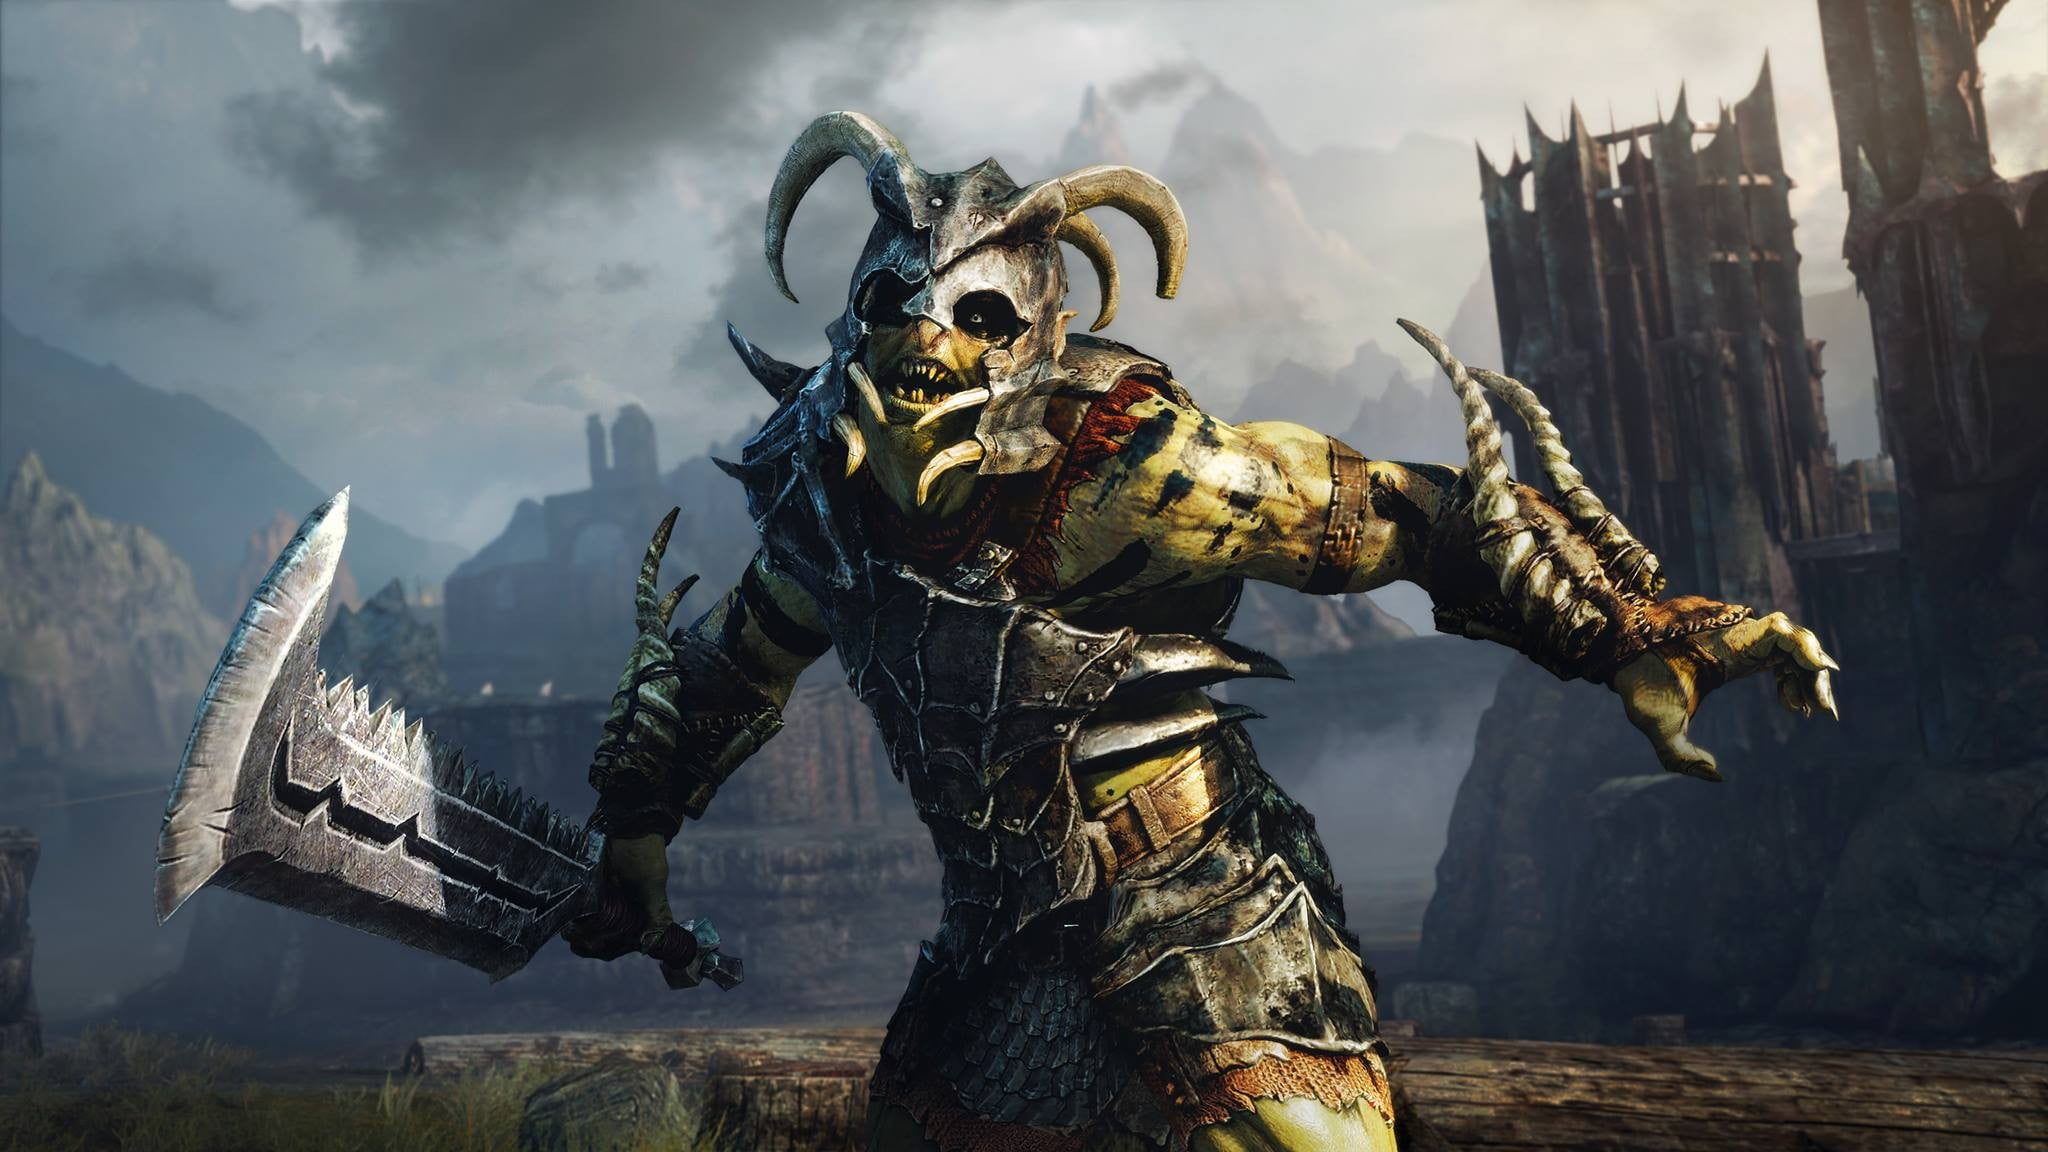 Video Game Middle-earth: Shadow of Mordor HD Wallpaper by Yukota